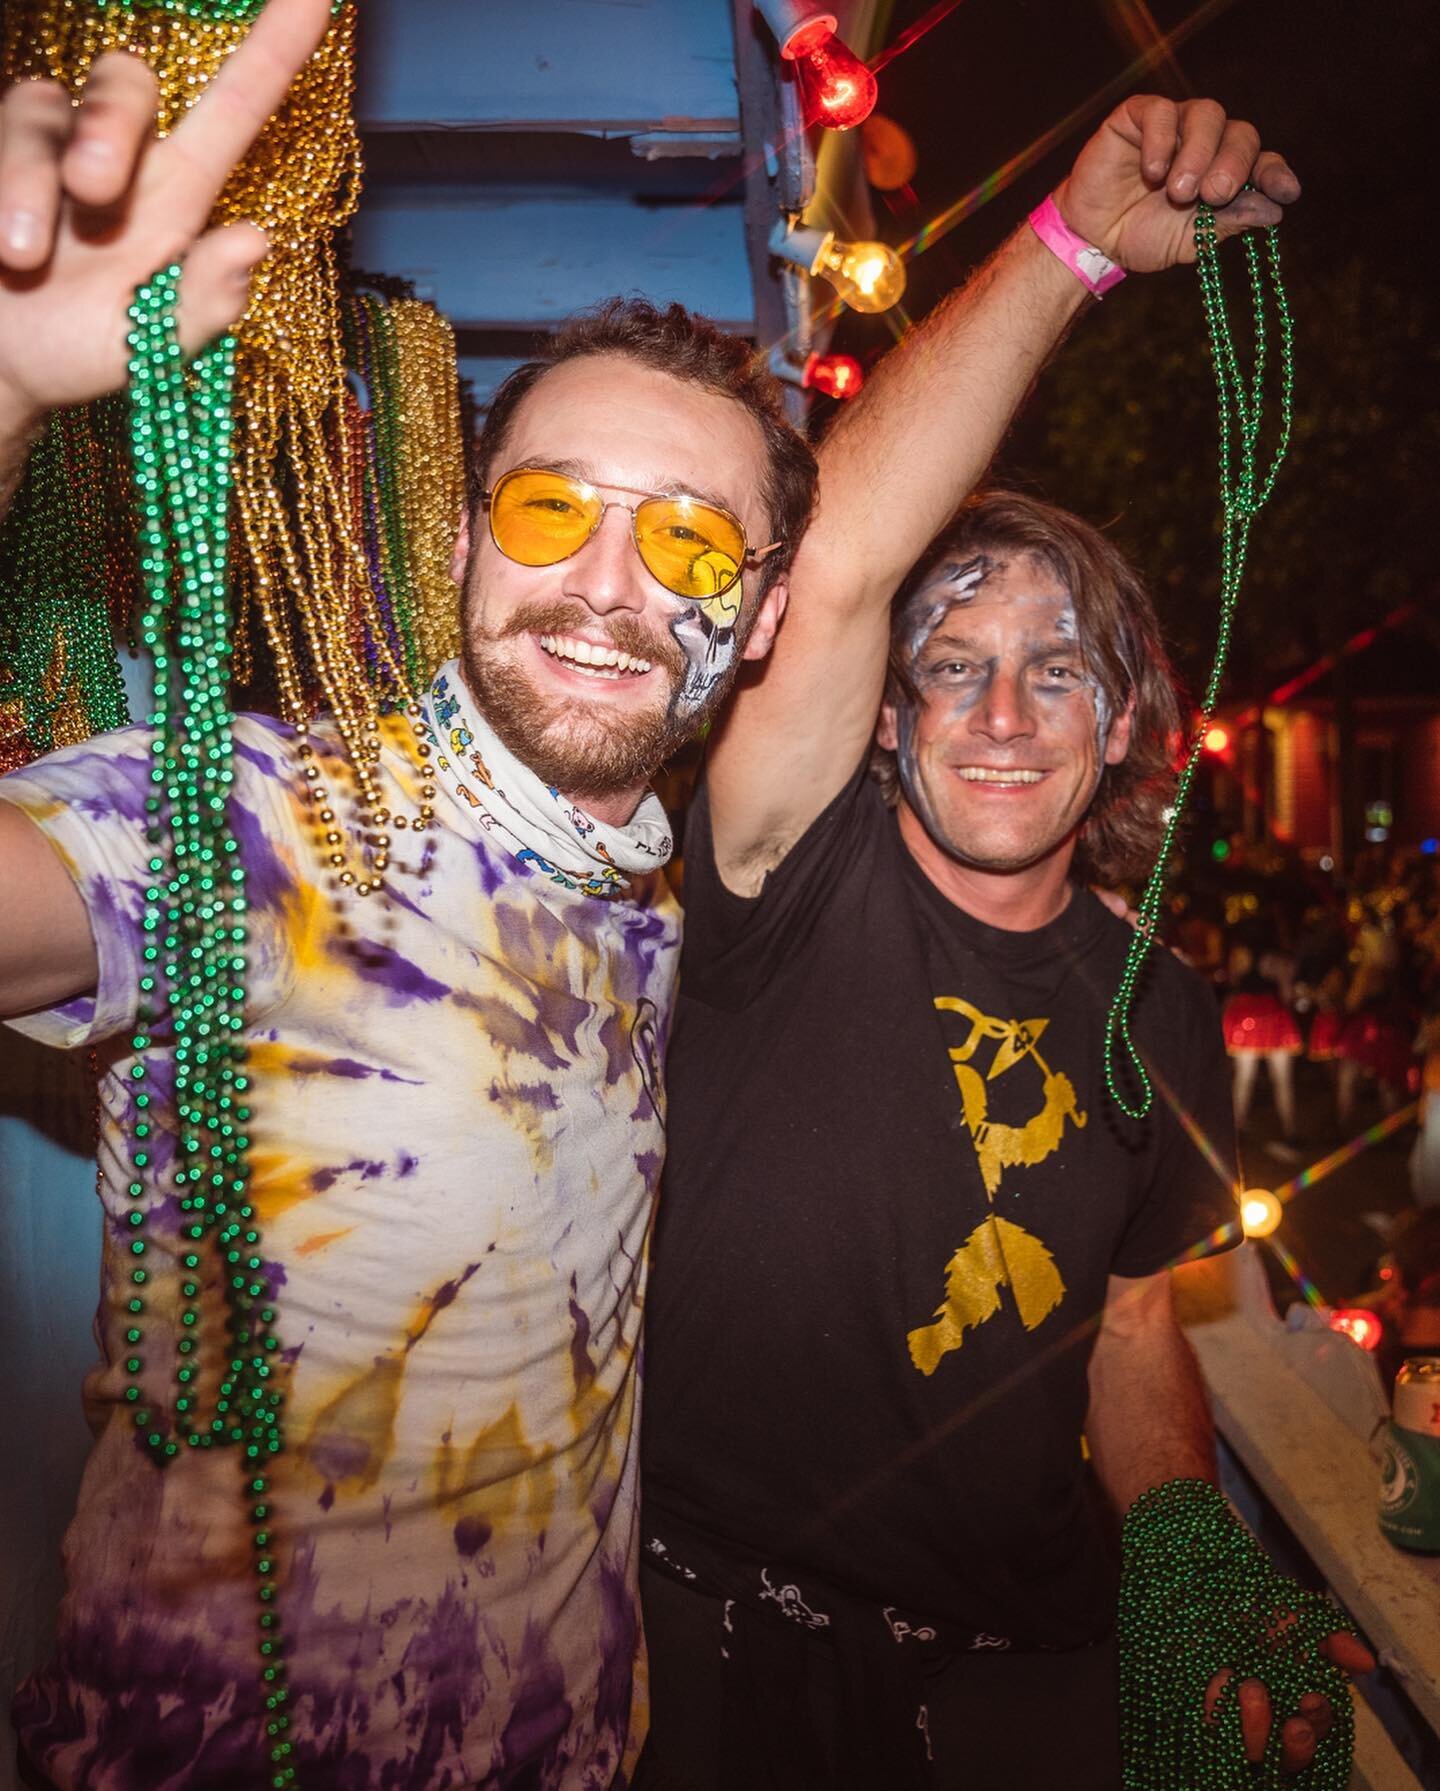 Spookiest party in the world @kreweofboo  was off the charts! Can&rsquo;t wait to come and and ride with the best float Lieutenant @belmerfudge @elmerscheewees 👻 
#kreweofboo #nola #halloween